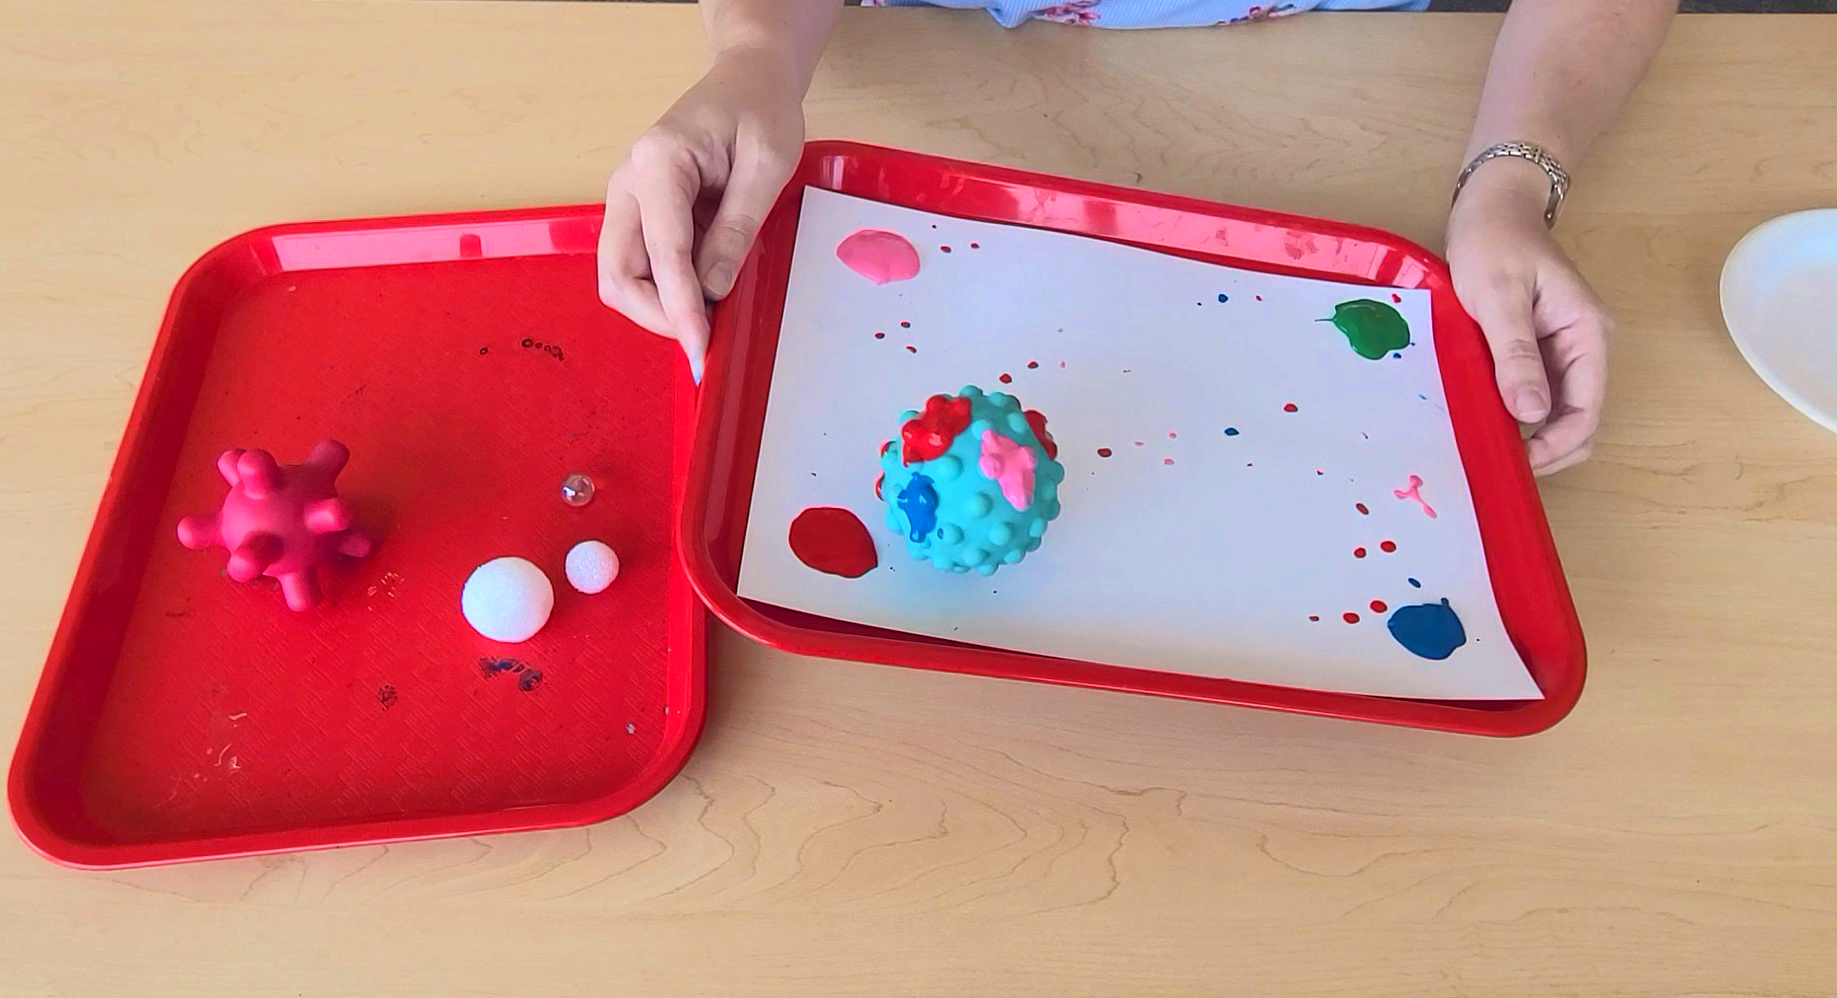 Play & Learn: Rolling in Paint